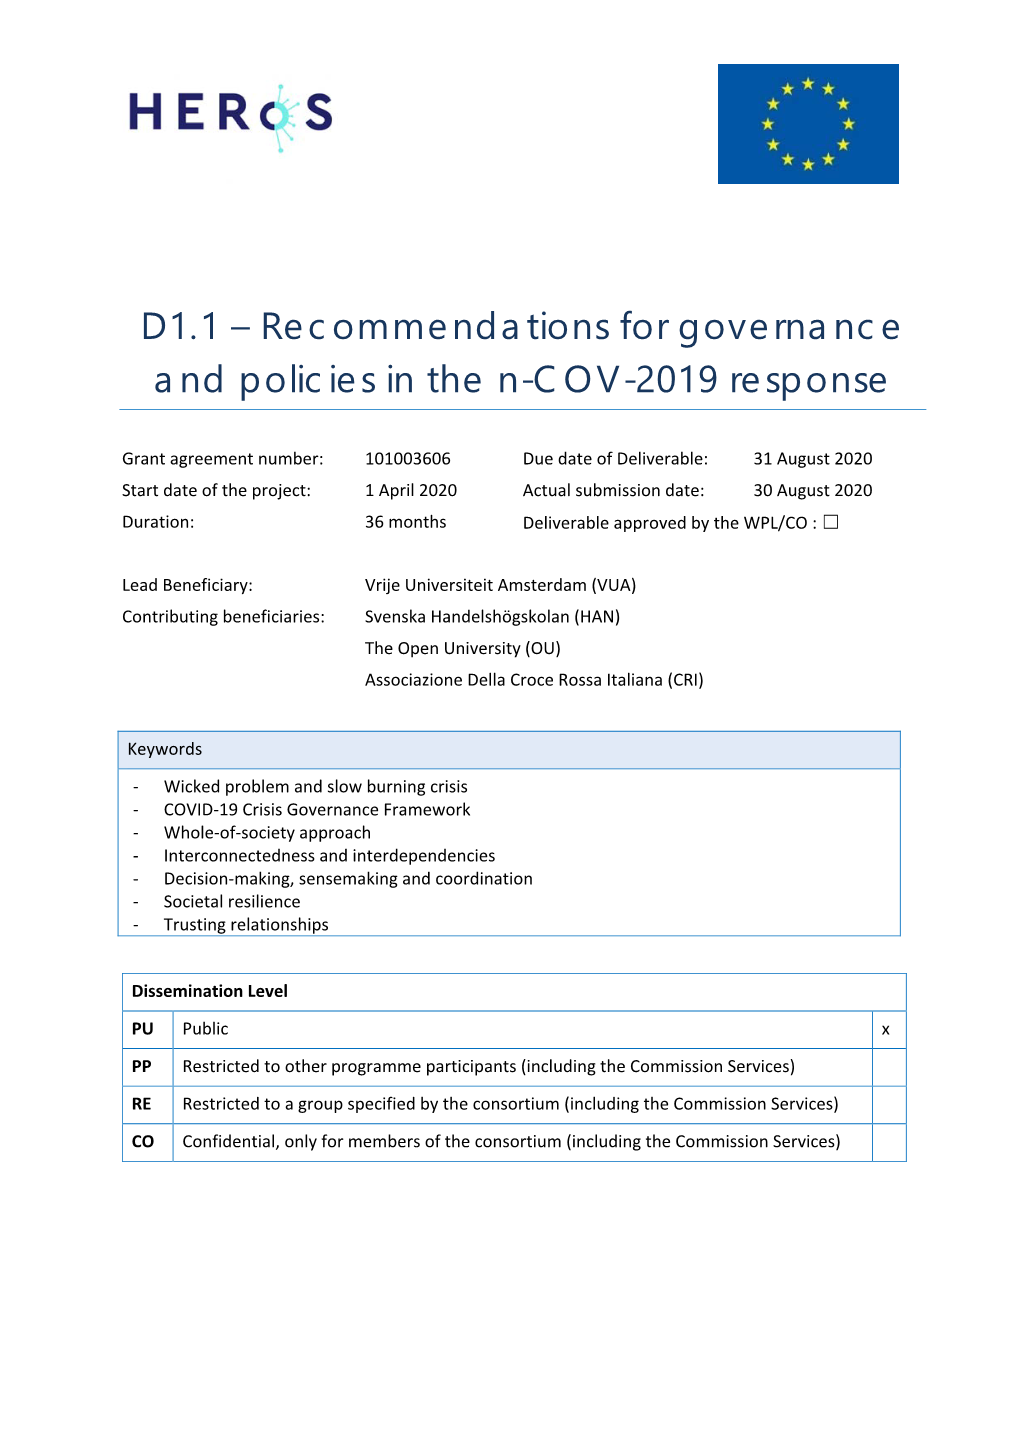 Recommendations for Governance and Policies in the COVID-19 Response